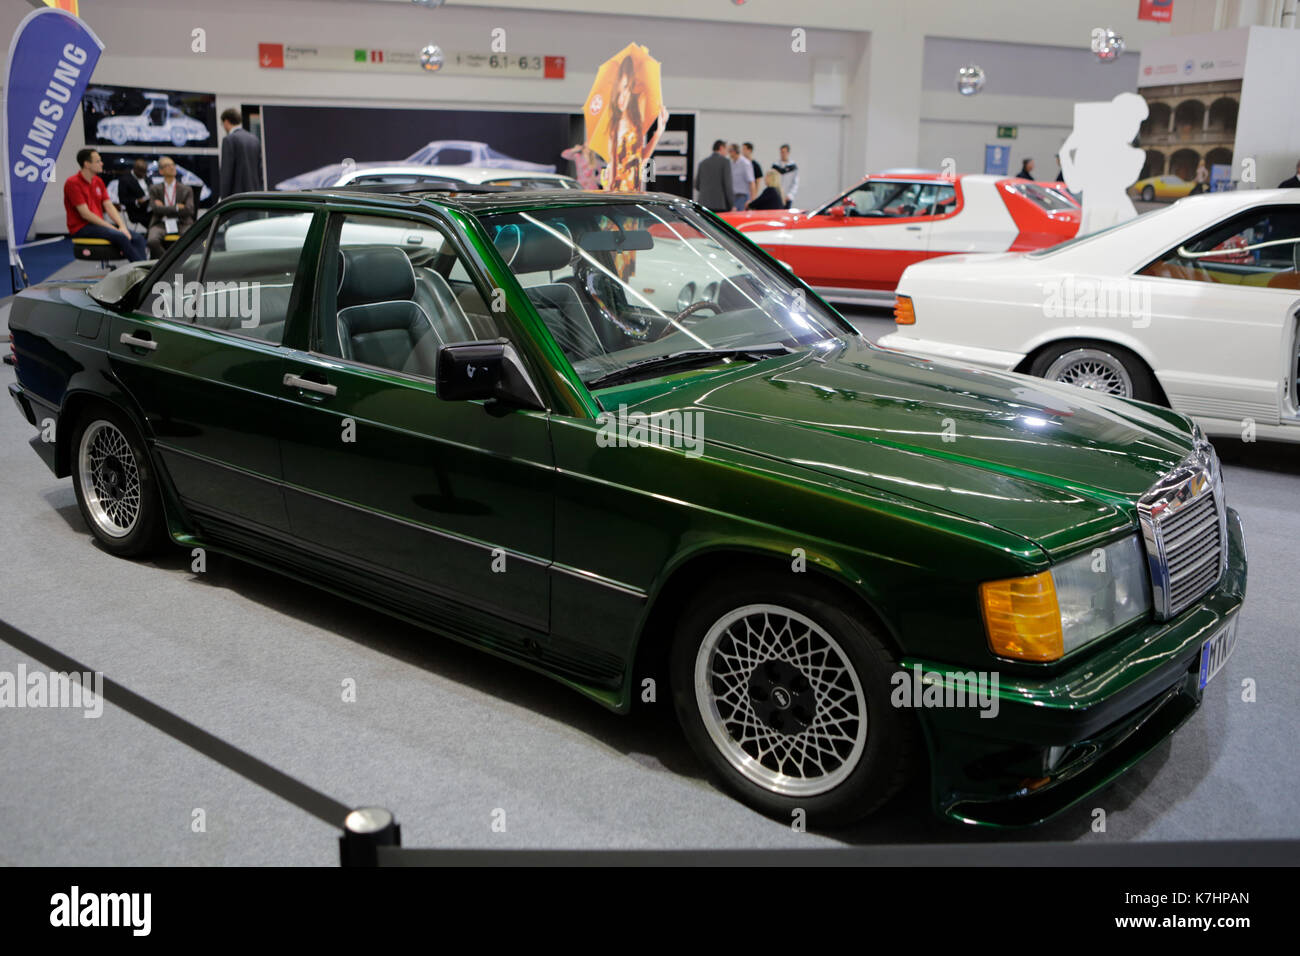 Frankfurt, Germany. 15th September 2017. A 1984 Mercedes-Benz 190 E SGS St. Tropez is presented in the special exhibition “The Wild 70s”. The 67. Internationale Automobil-Ausstellung (IAA in Frankfurt is with over 1000 exhibitors one of the largest Motor Shows in the world. The show will open for the general public from the 16th until the 24th September. Stock Photo